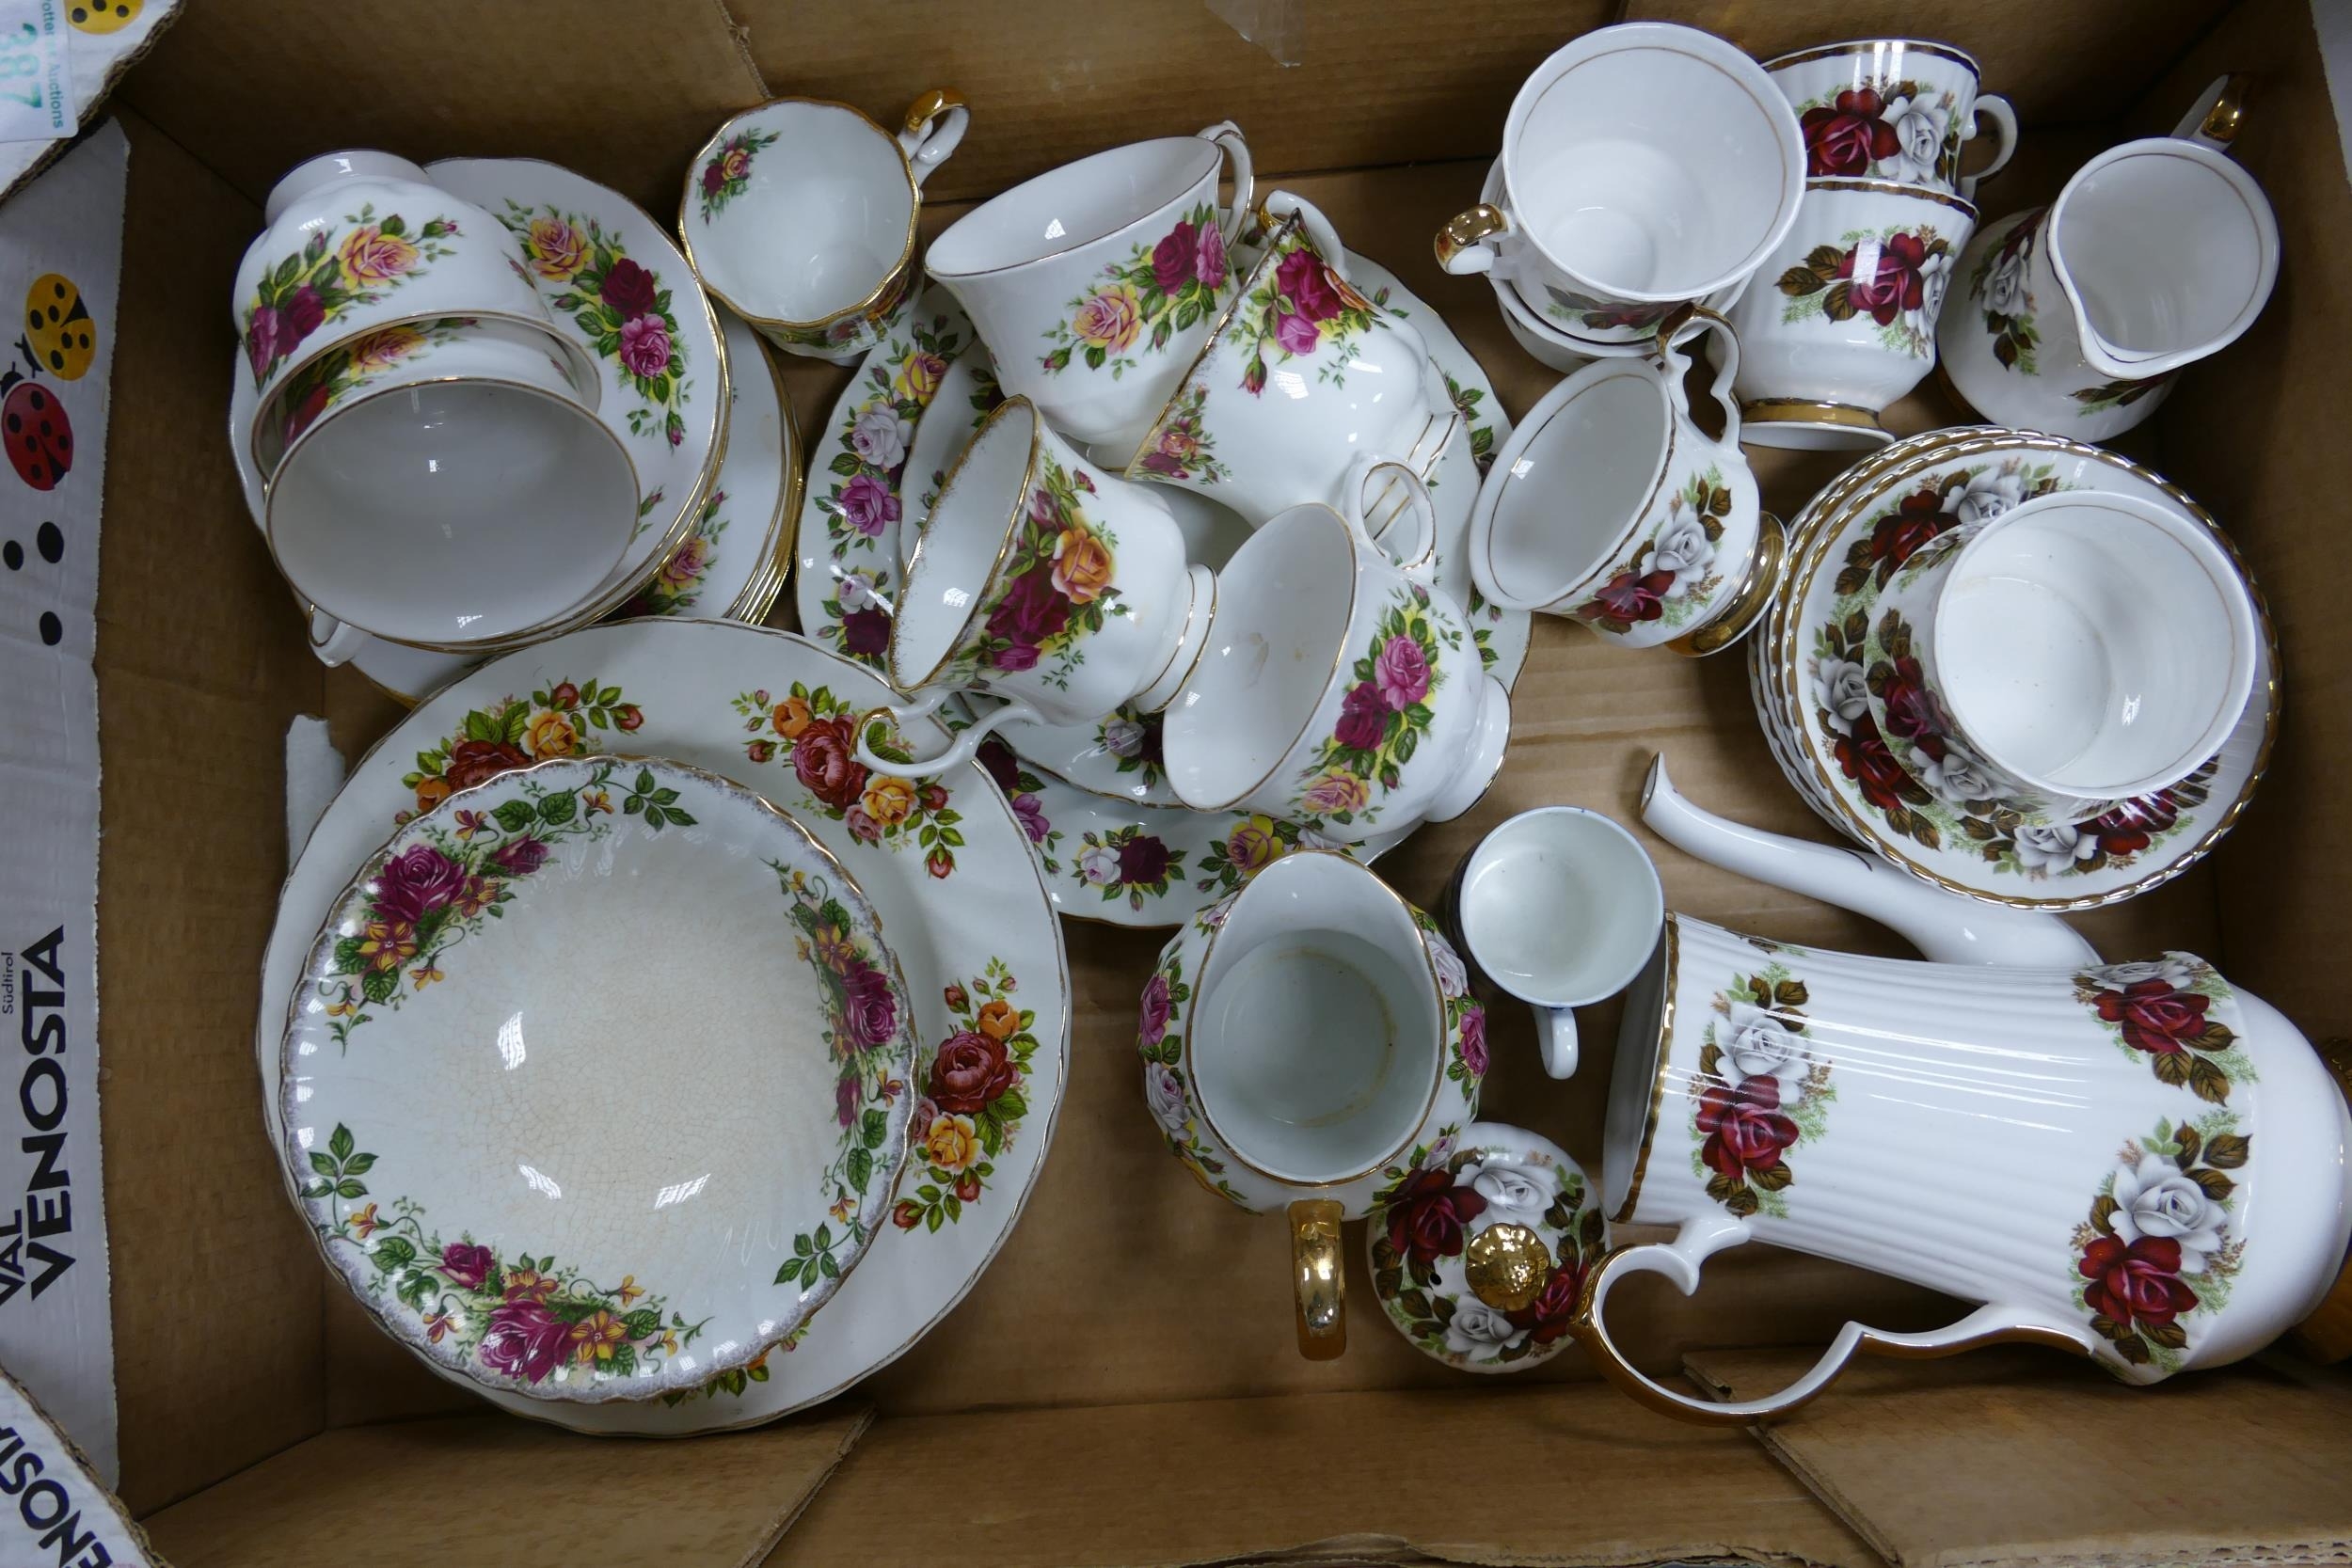 A collection of various floral tea and dinnerware from Washington Potteries, Royal Albert Old